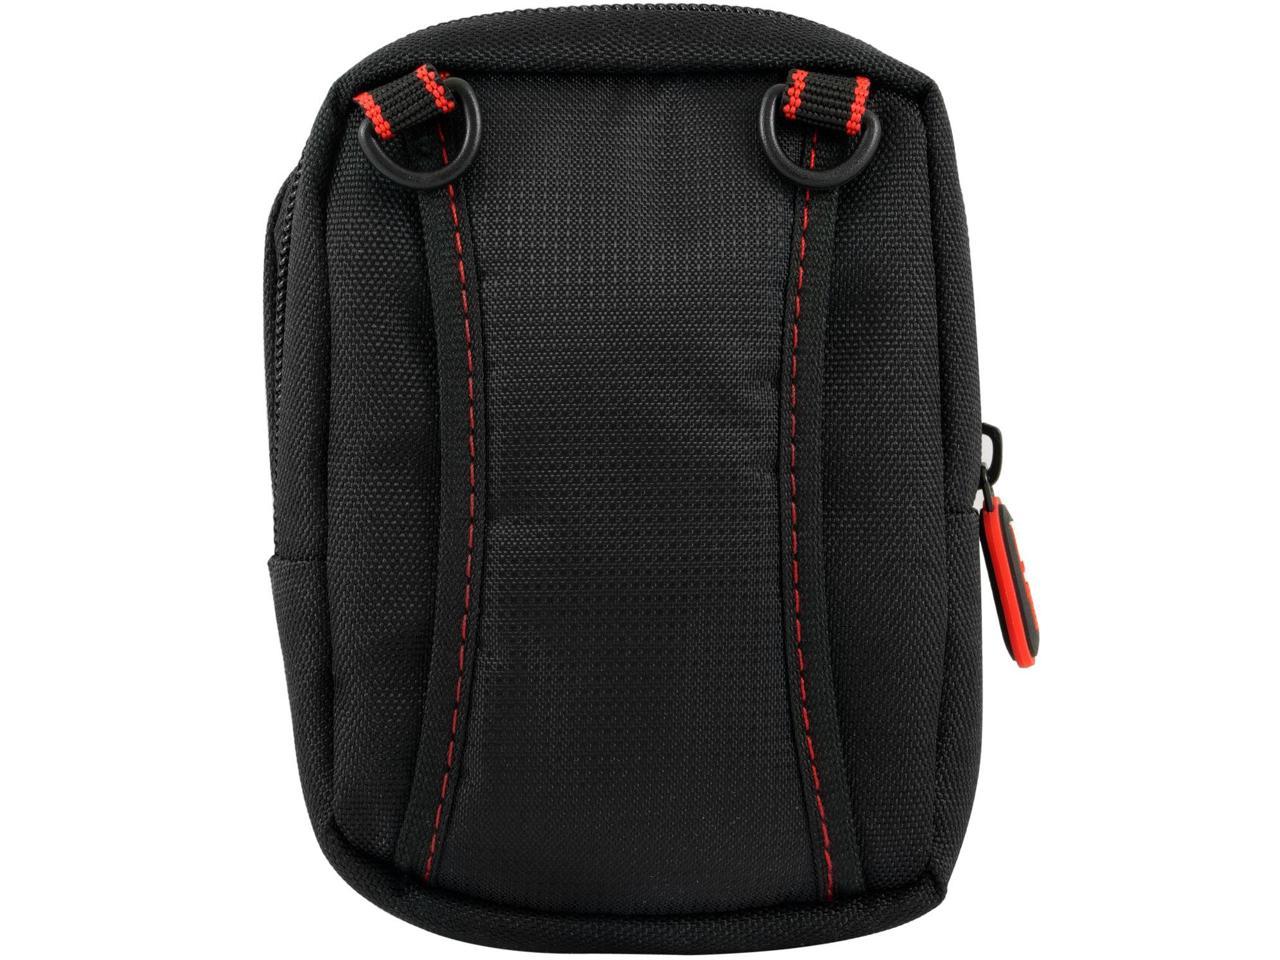 Deco Gear Point and Shoot Field Bag Camera Case (Black/Red) - PNS100BK ...